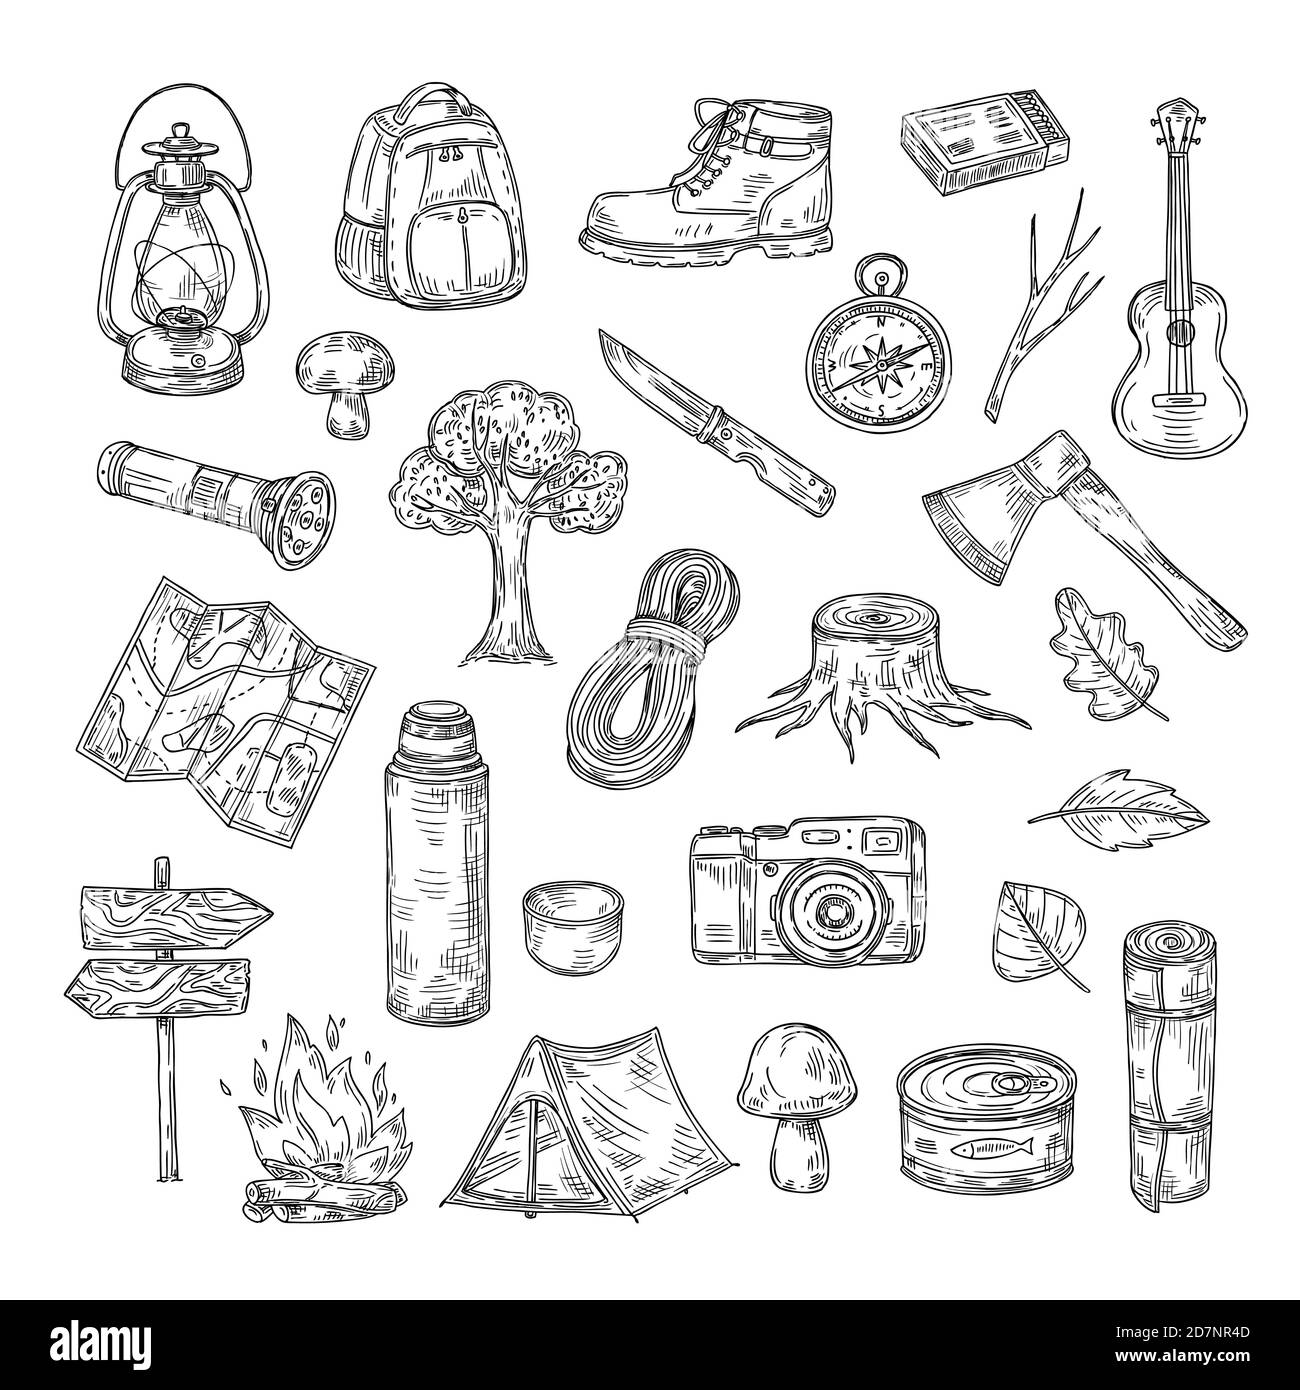 Doodle camping. Hiking camp natural wood scout outdoor summer adventure sketch outline vector icons. Illustration of sketch hiking tourism, travel expedition elements Stock Vector